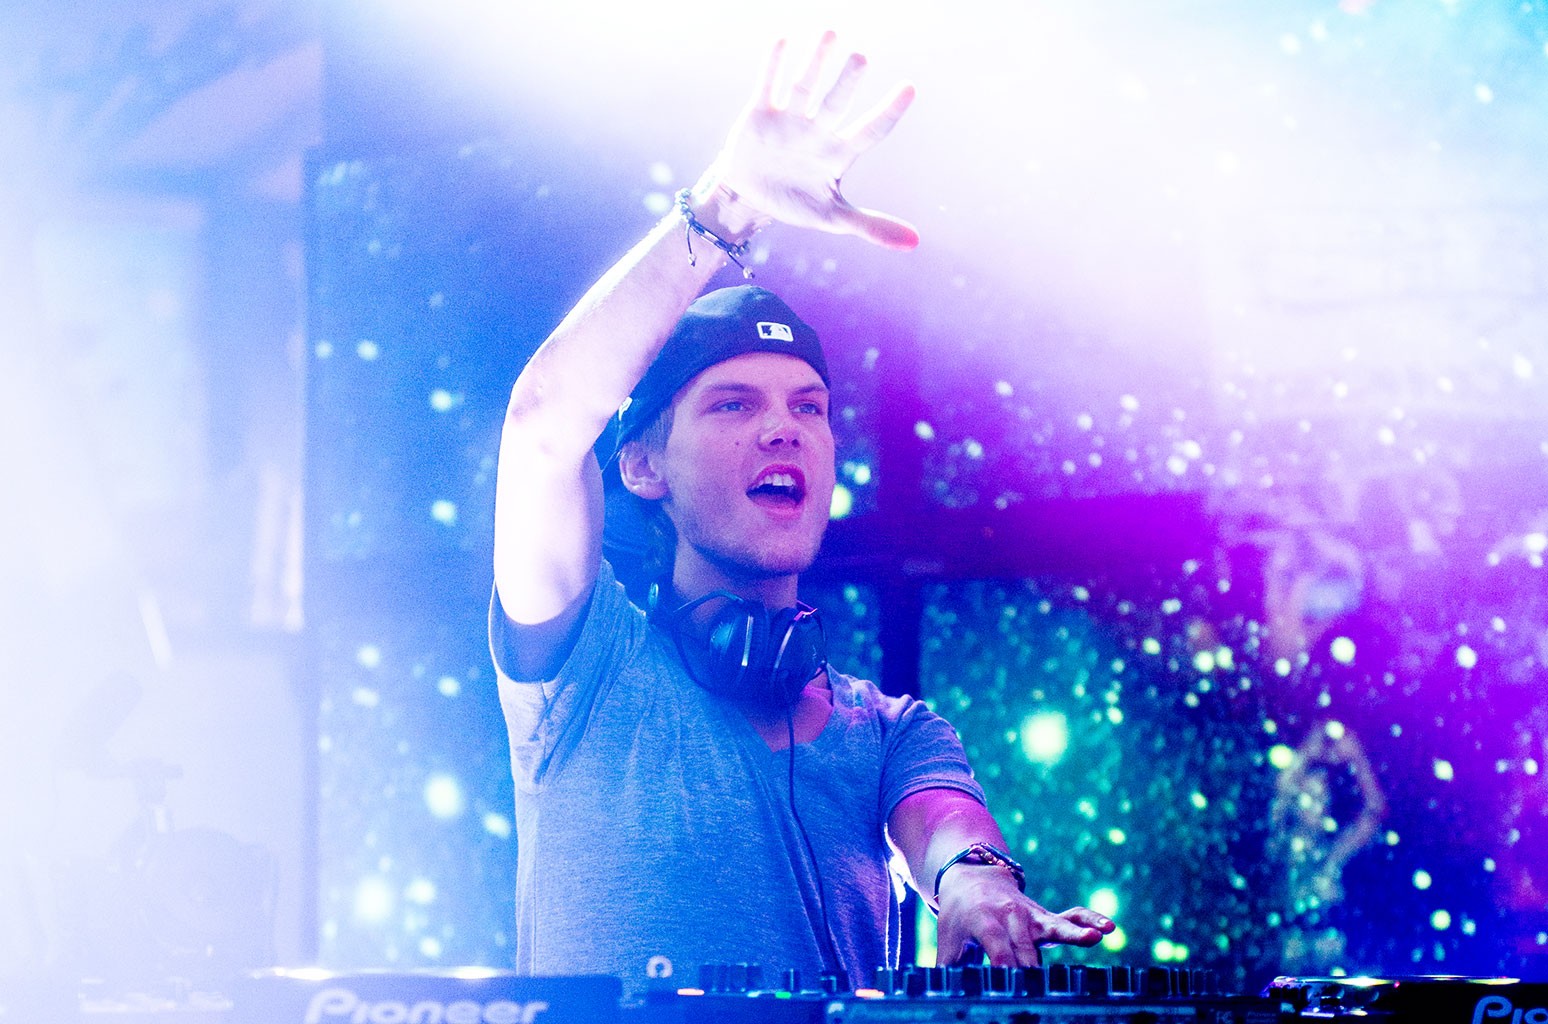 On This Day in Billboard Dance History: Avicii Wakes Up a New Style of Dance Music